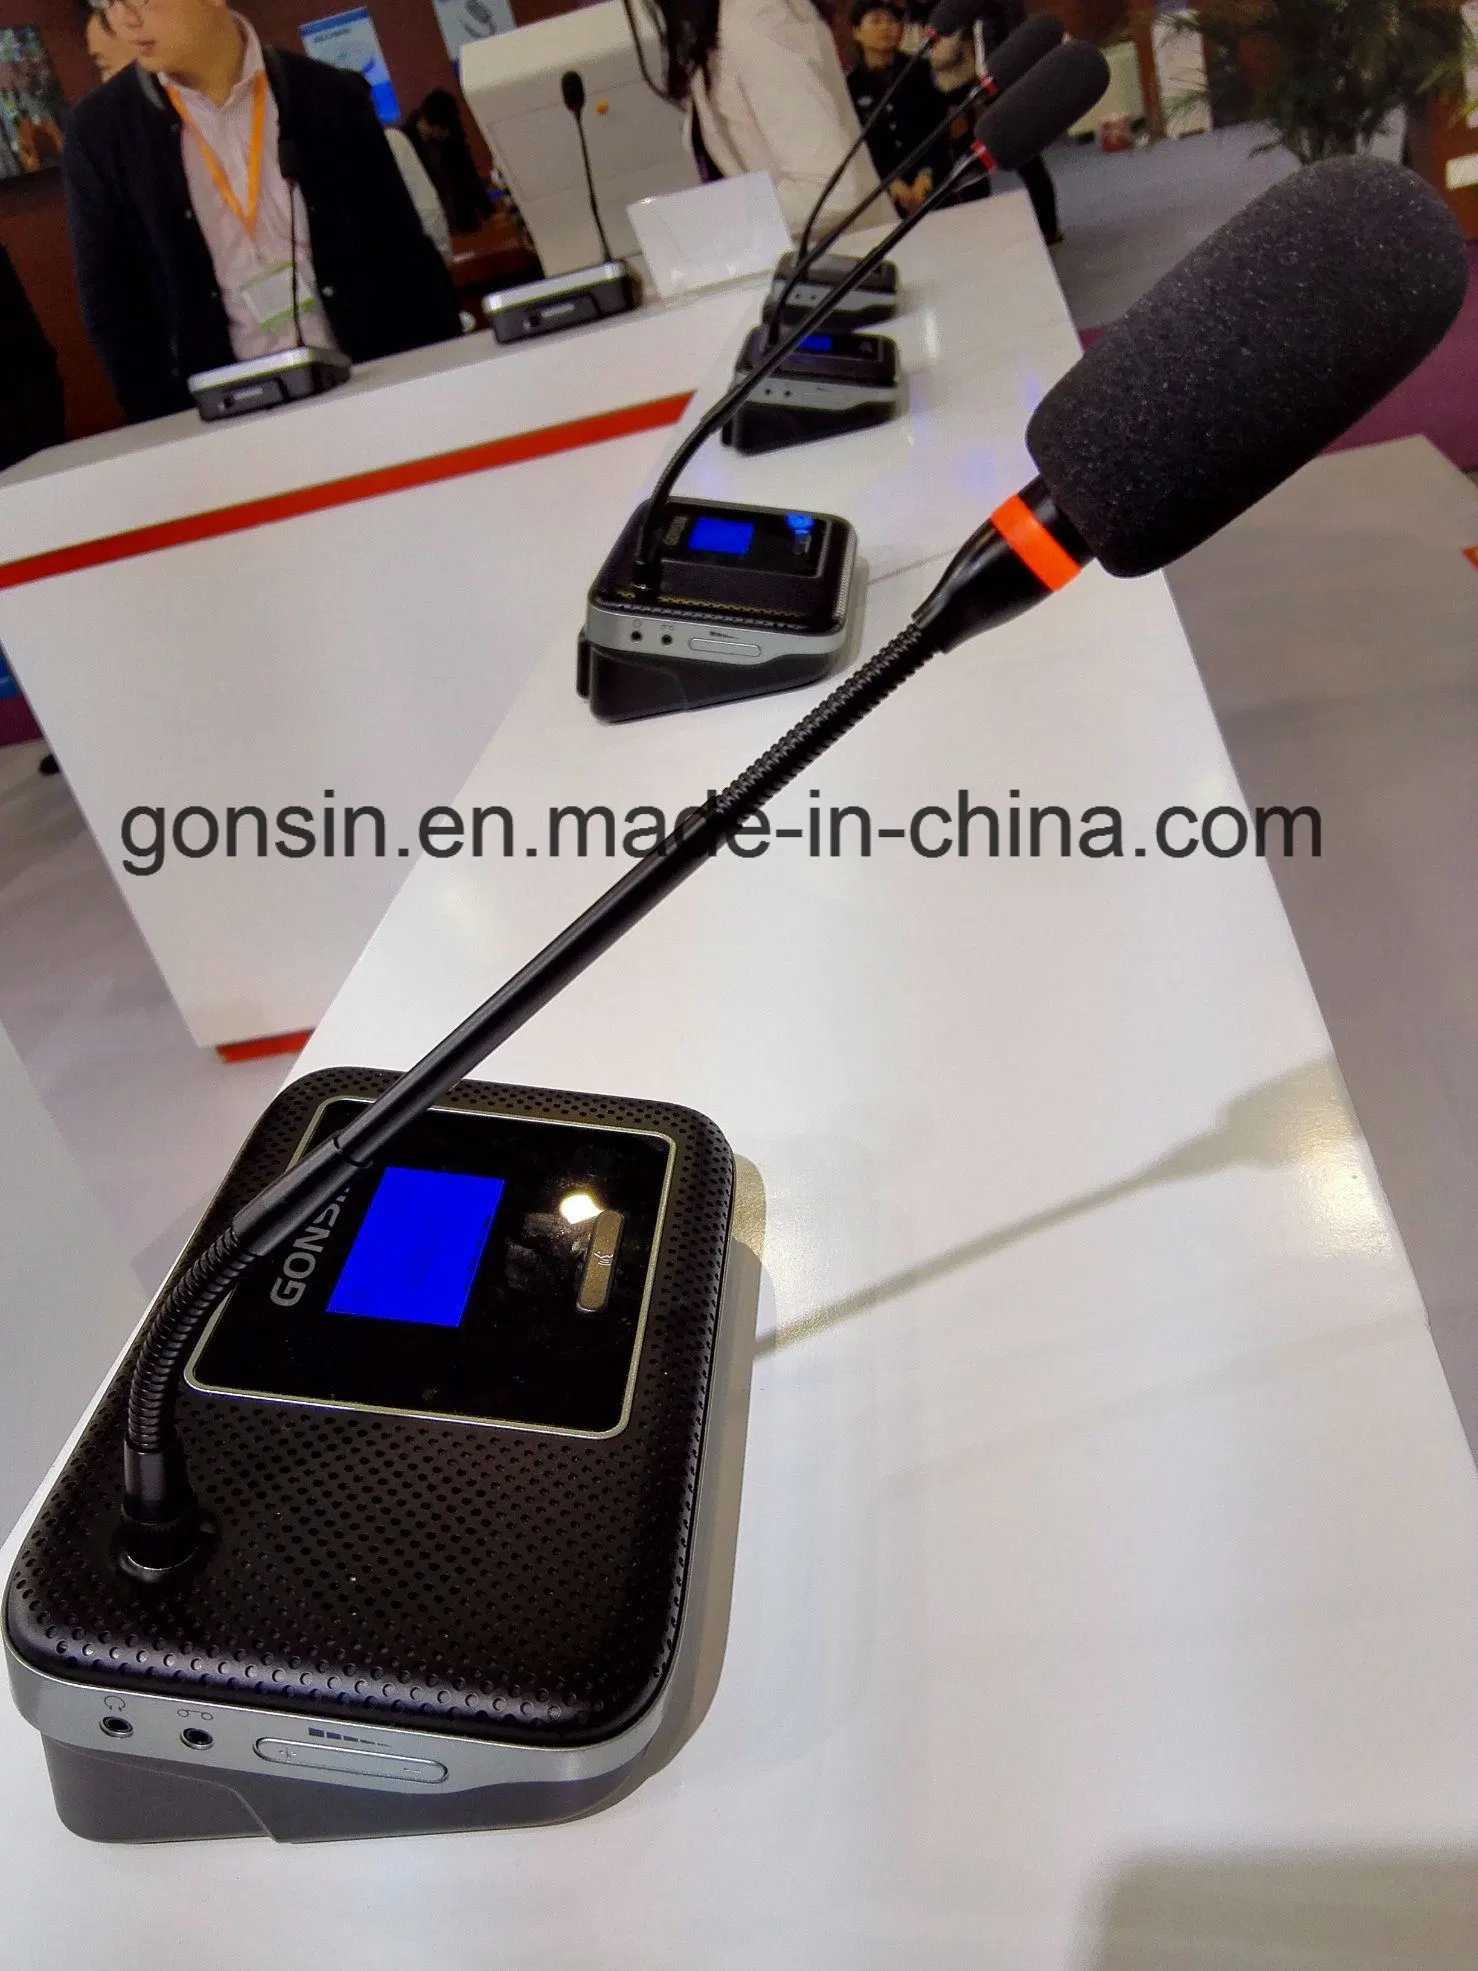 Gonsin Digital Wireless Conference System